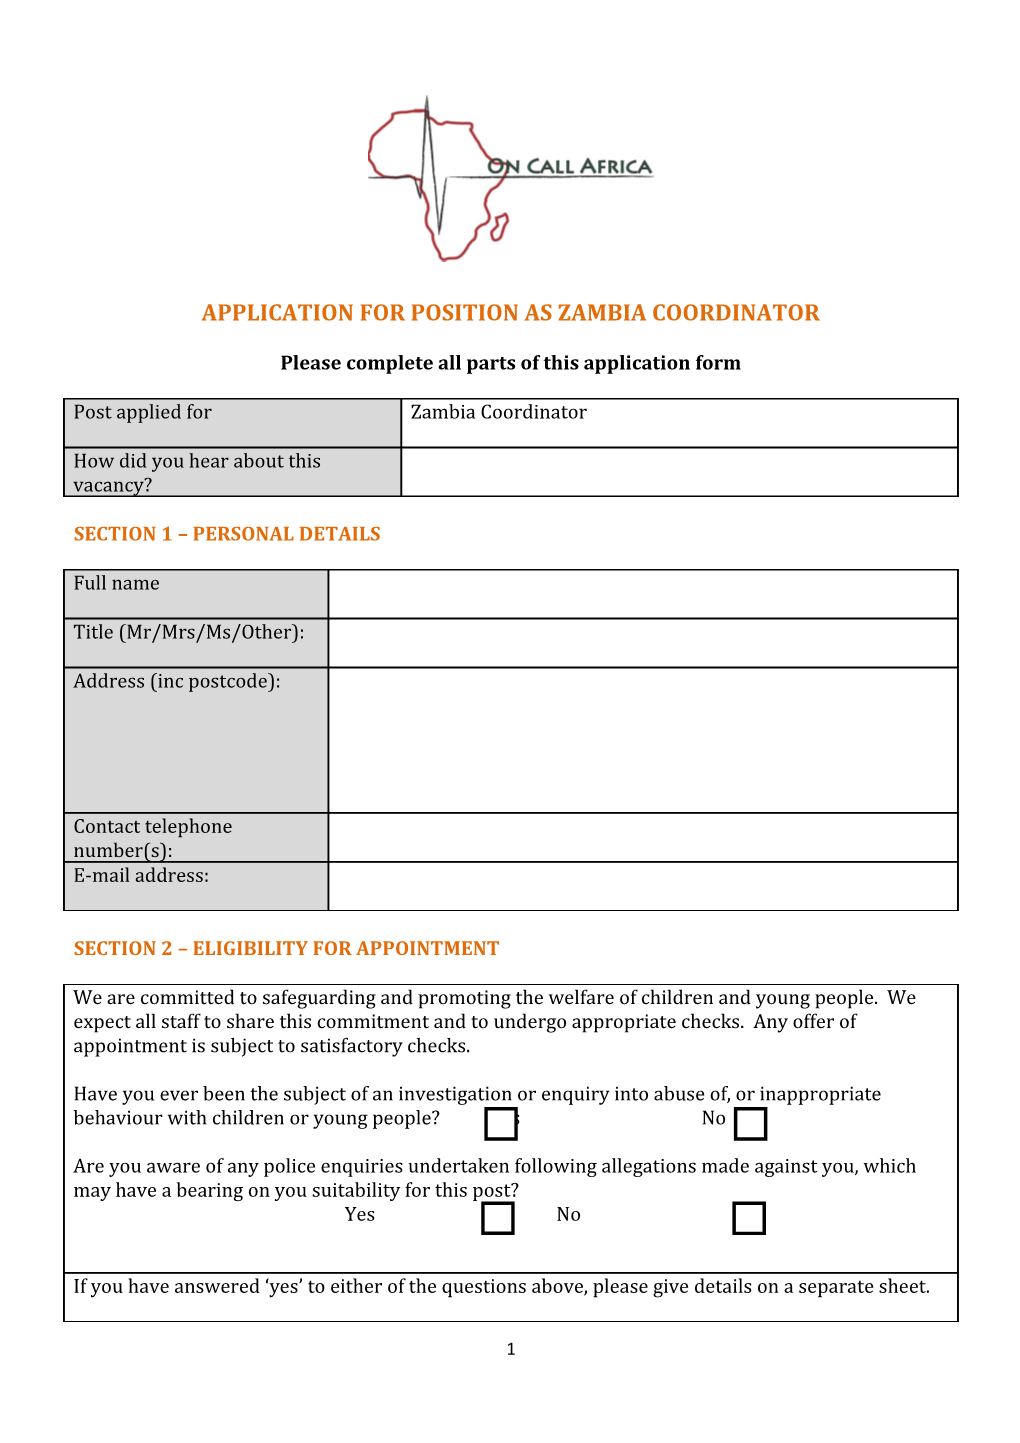 Application for Position As Zambia Coordinator